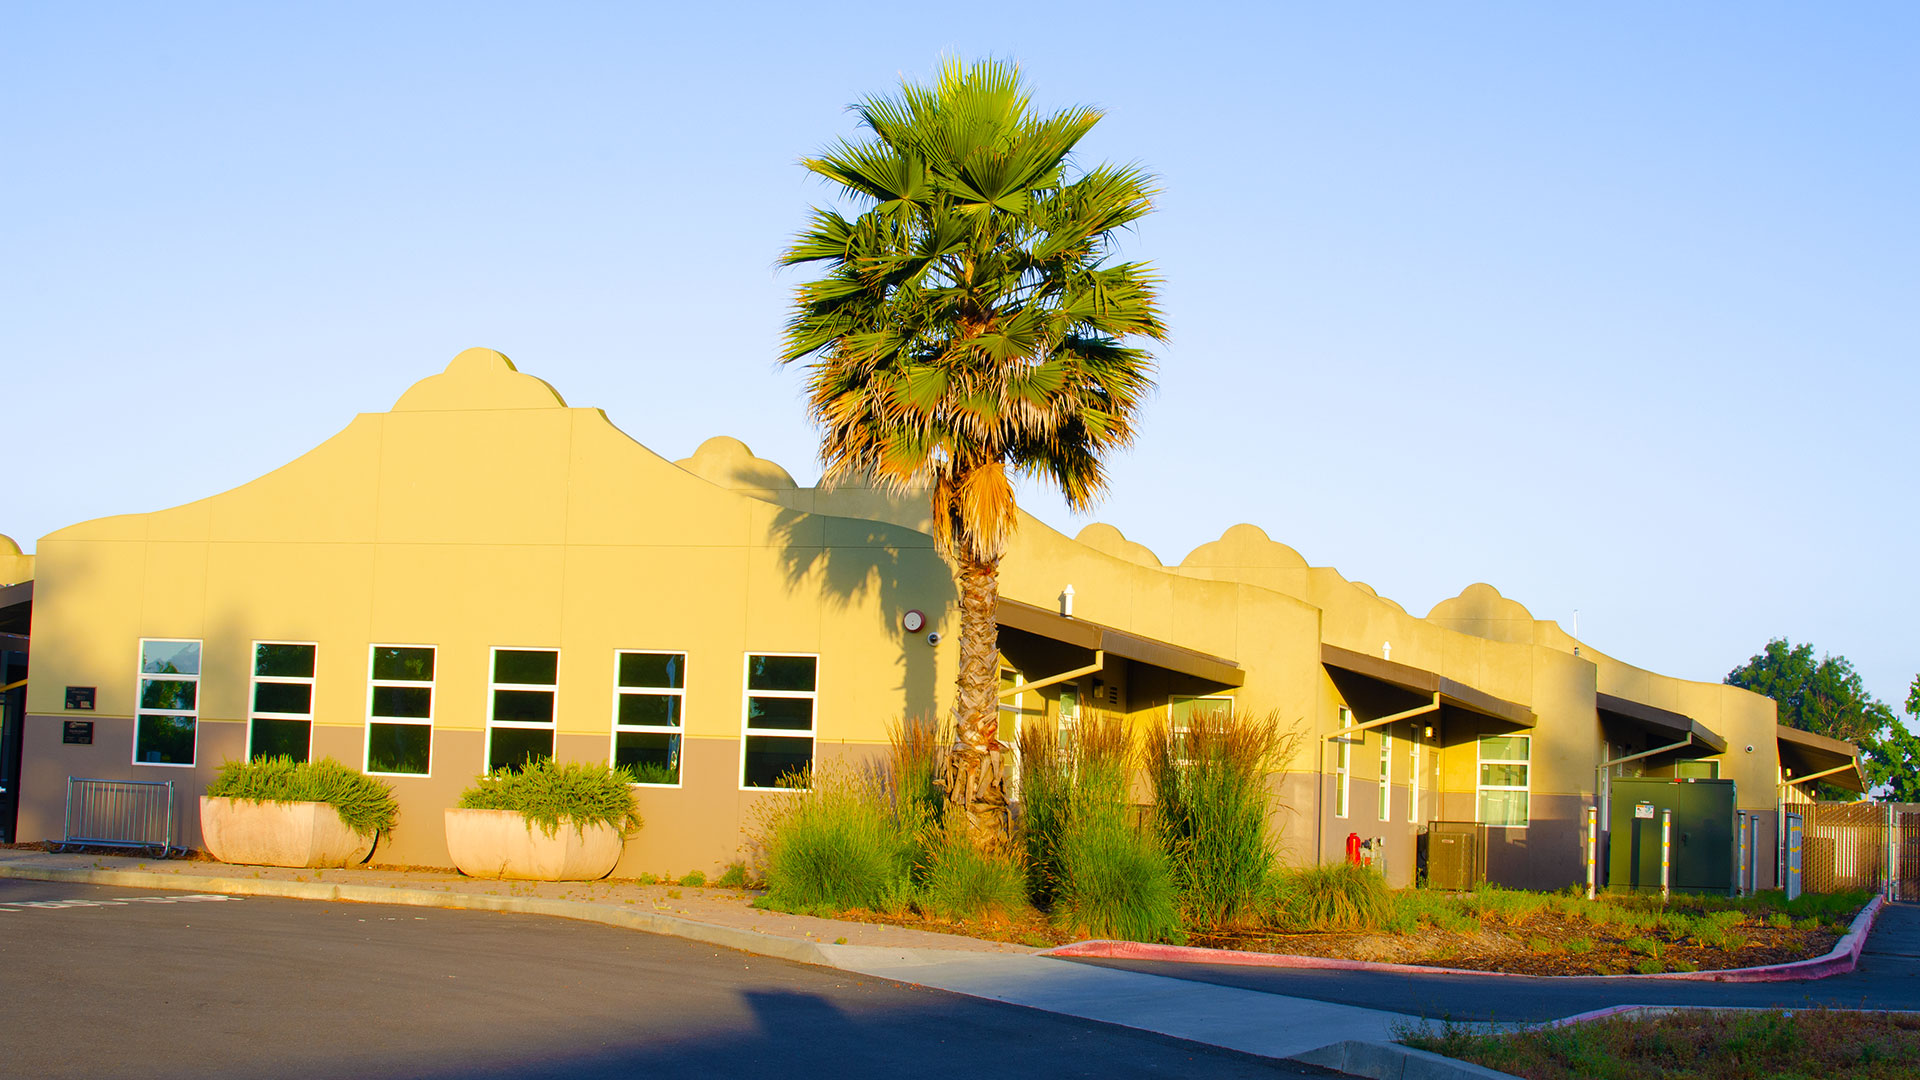 Entrance of school, with mission-style rooflines, beige walls, and gray wainscot. Bushes and palm tree landscaping.